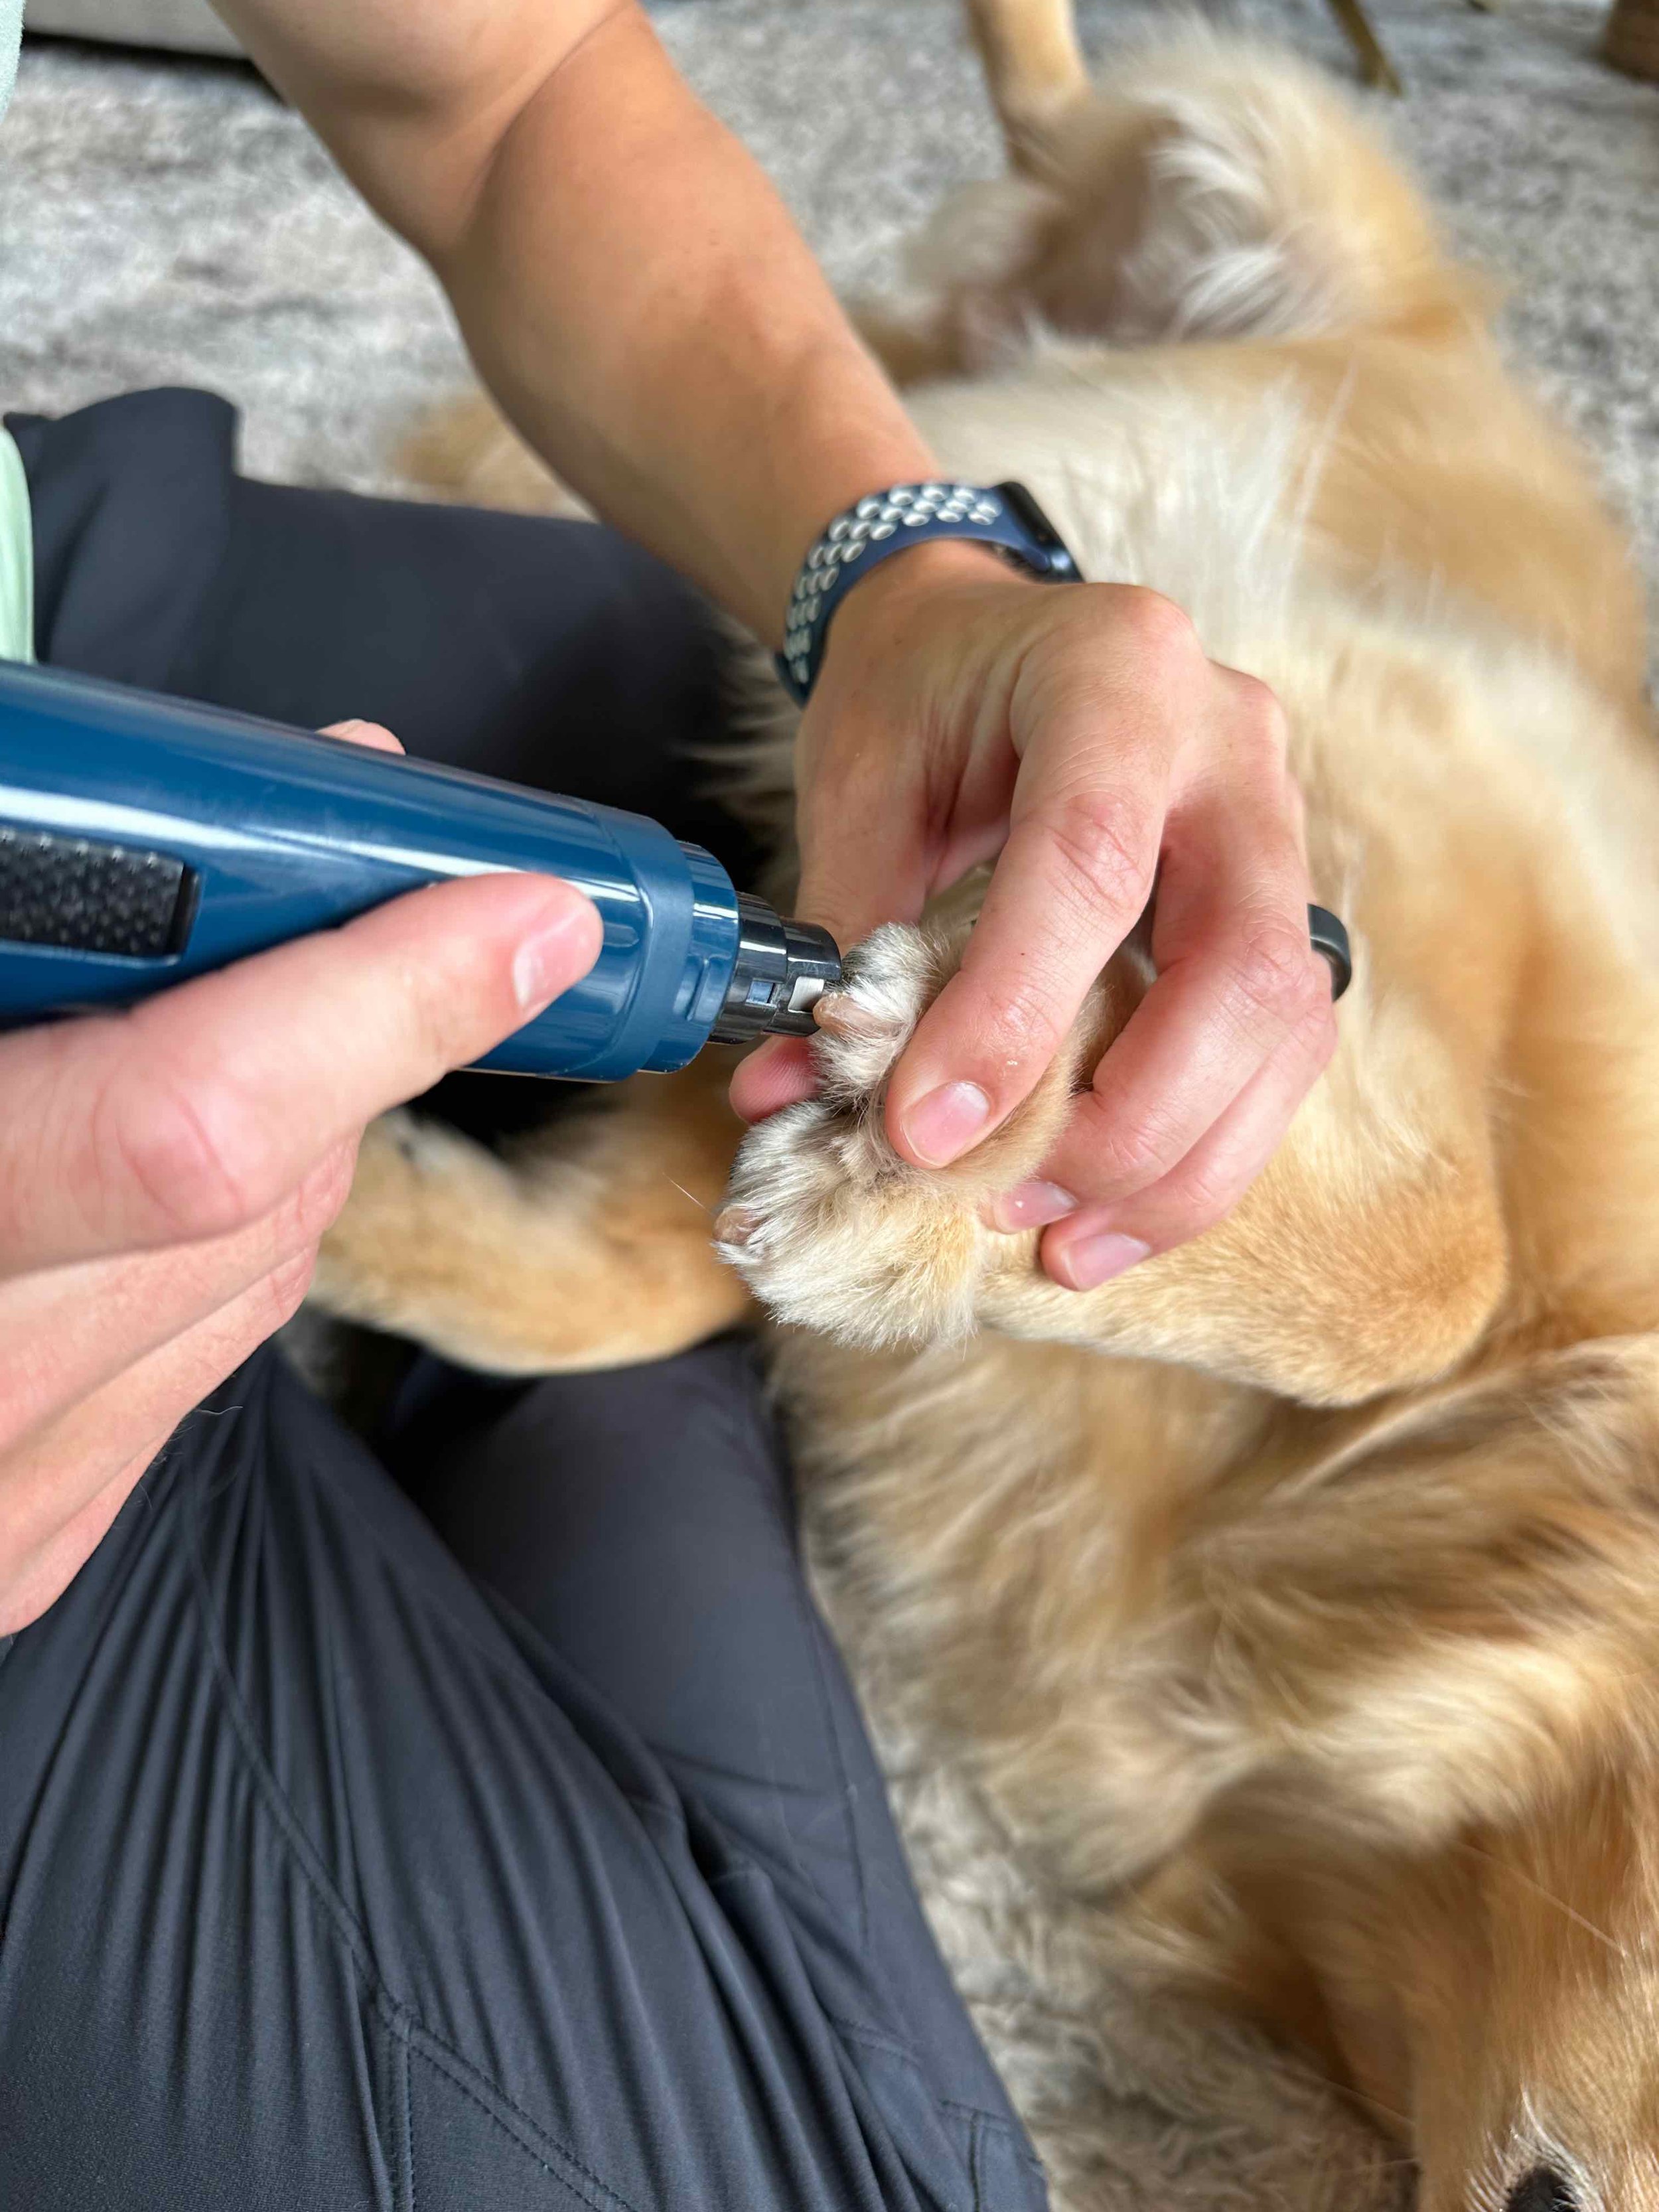 How To Clip and Trim Dog Nails Safely